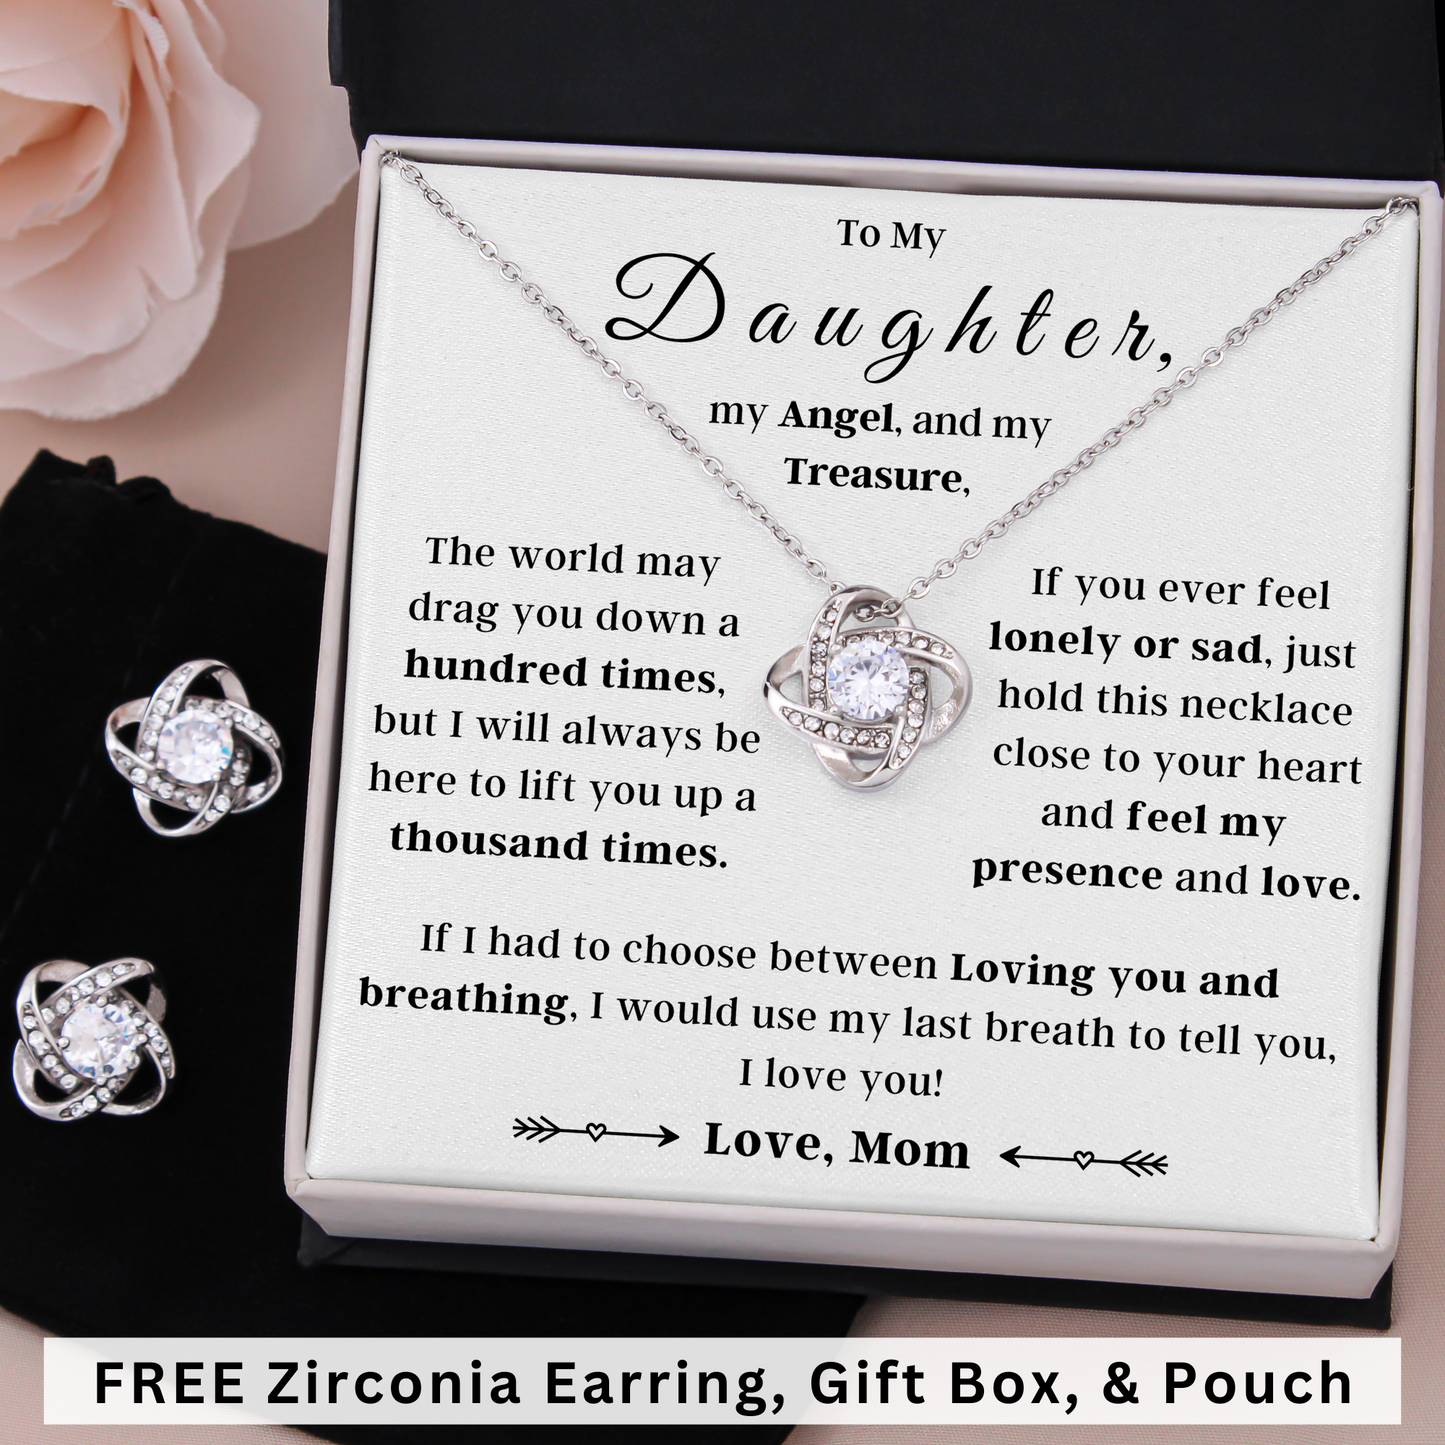 Love Knot Necklace with Free Zirconia Earring, Gift Box, and Velvet Pouch